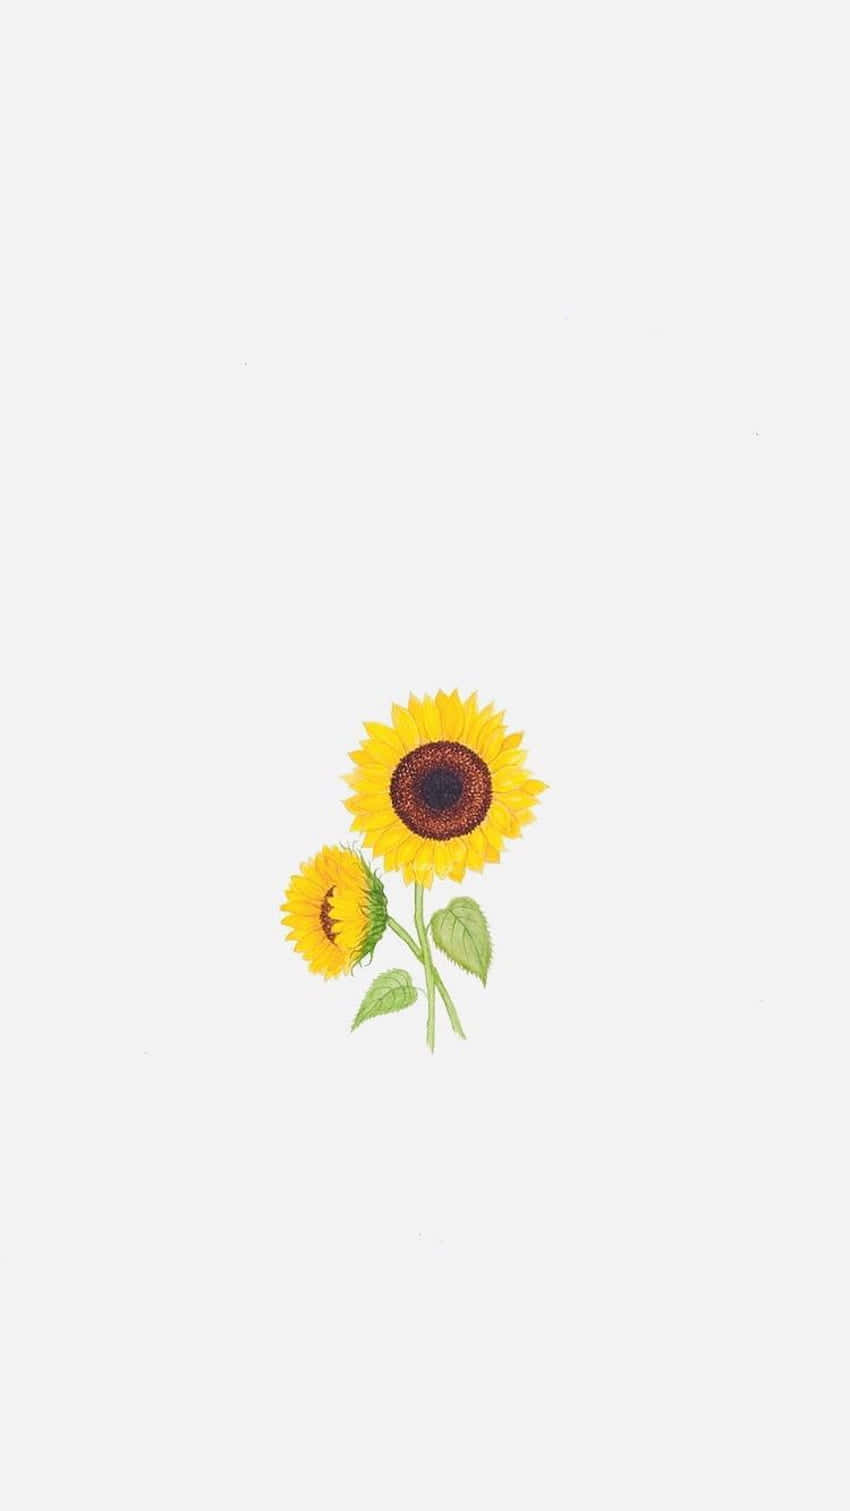 Enjoy the Beauty of Sunflowers with your iPhone Wallpaper